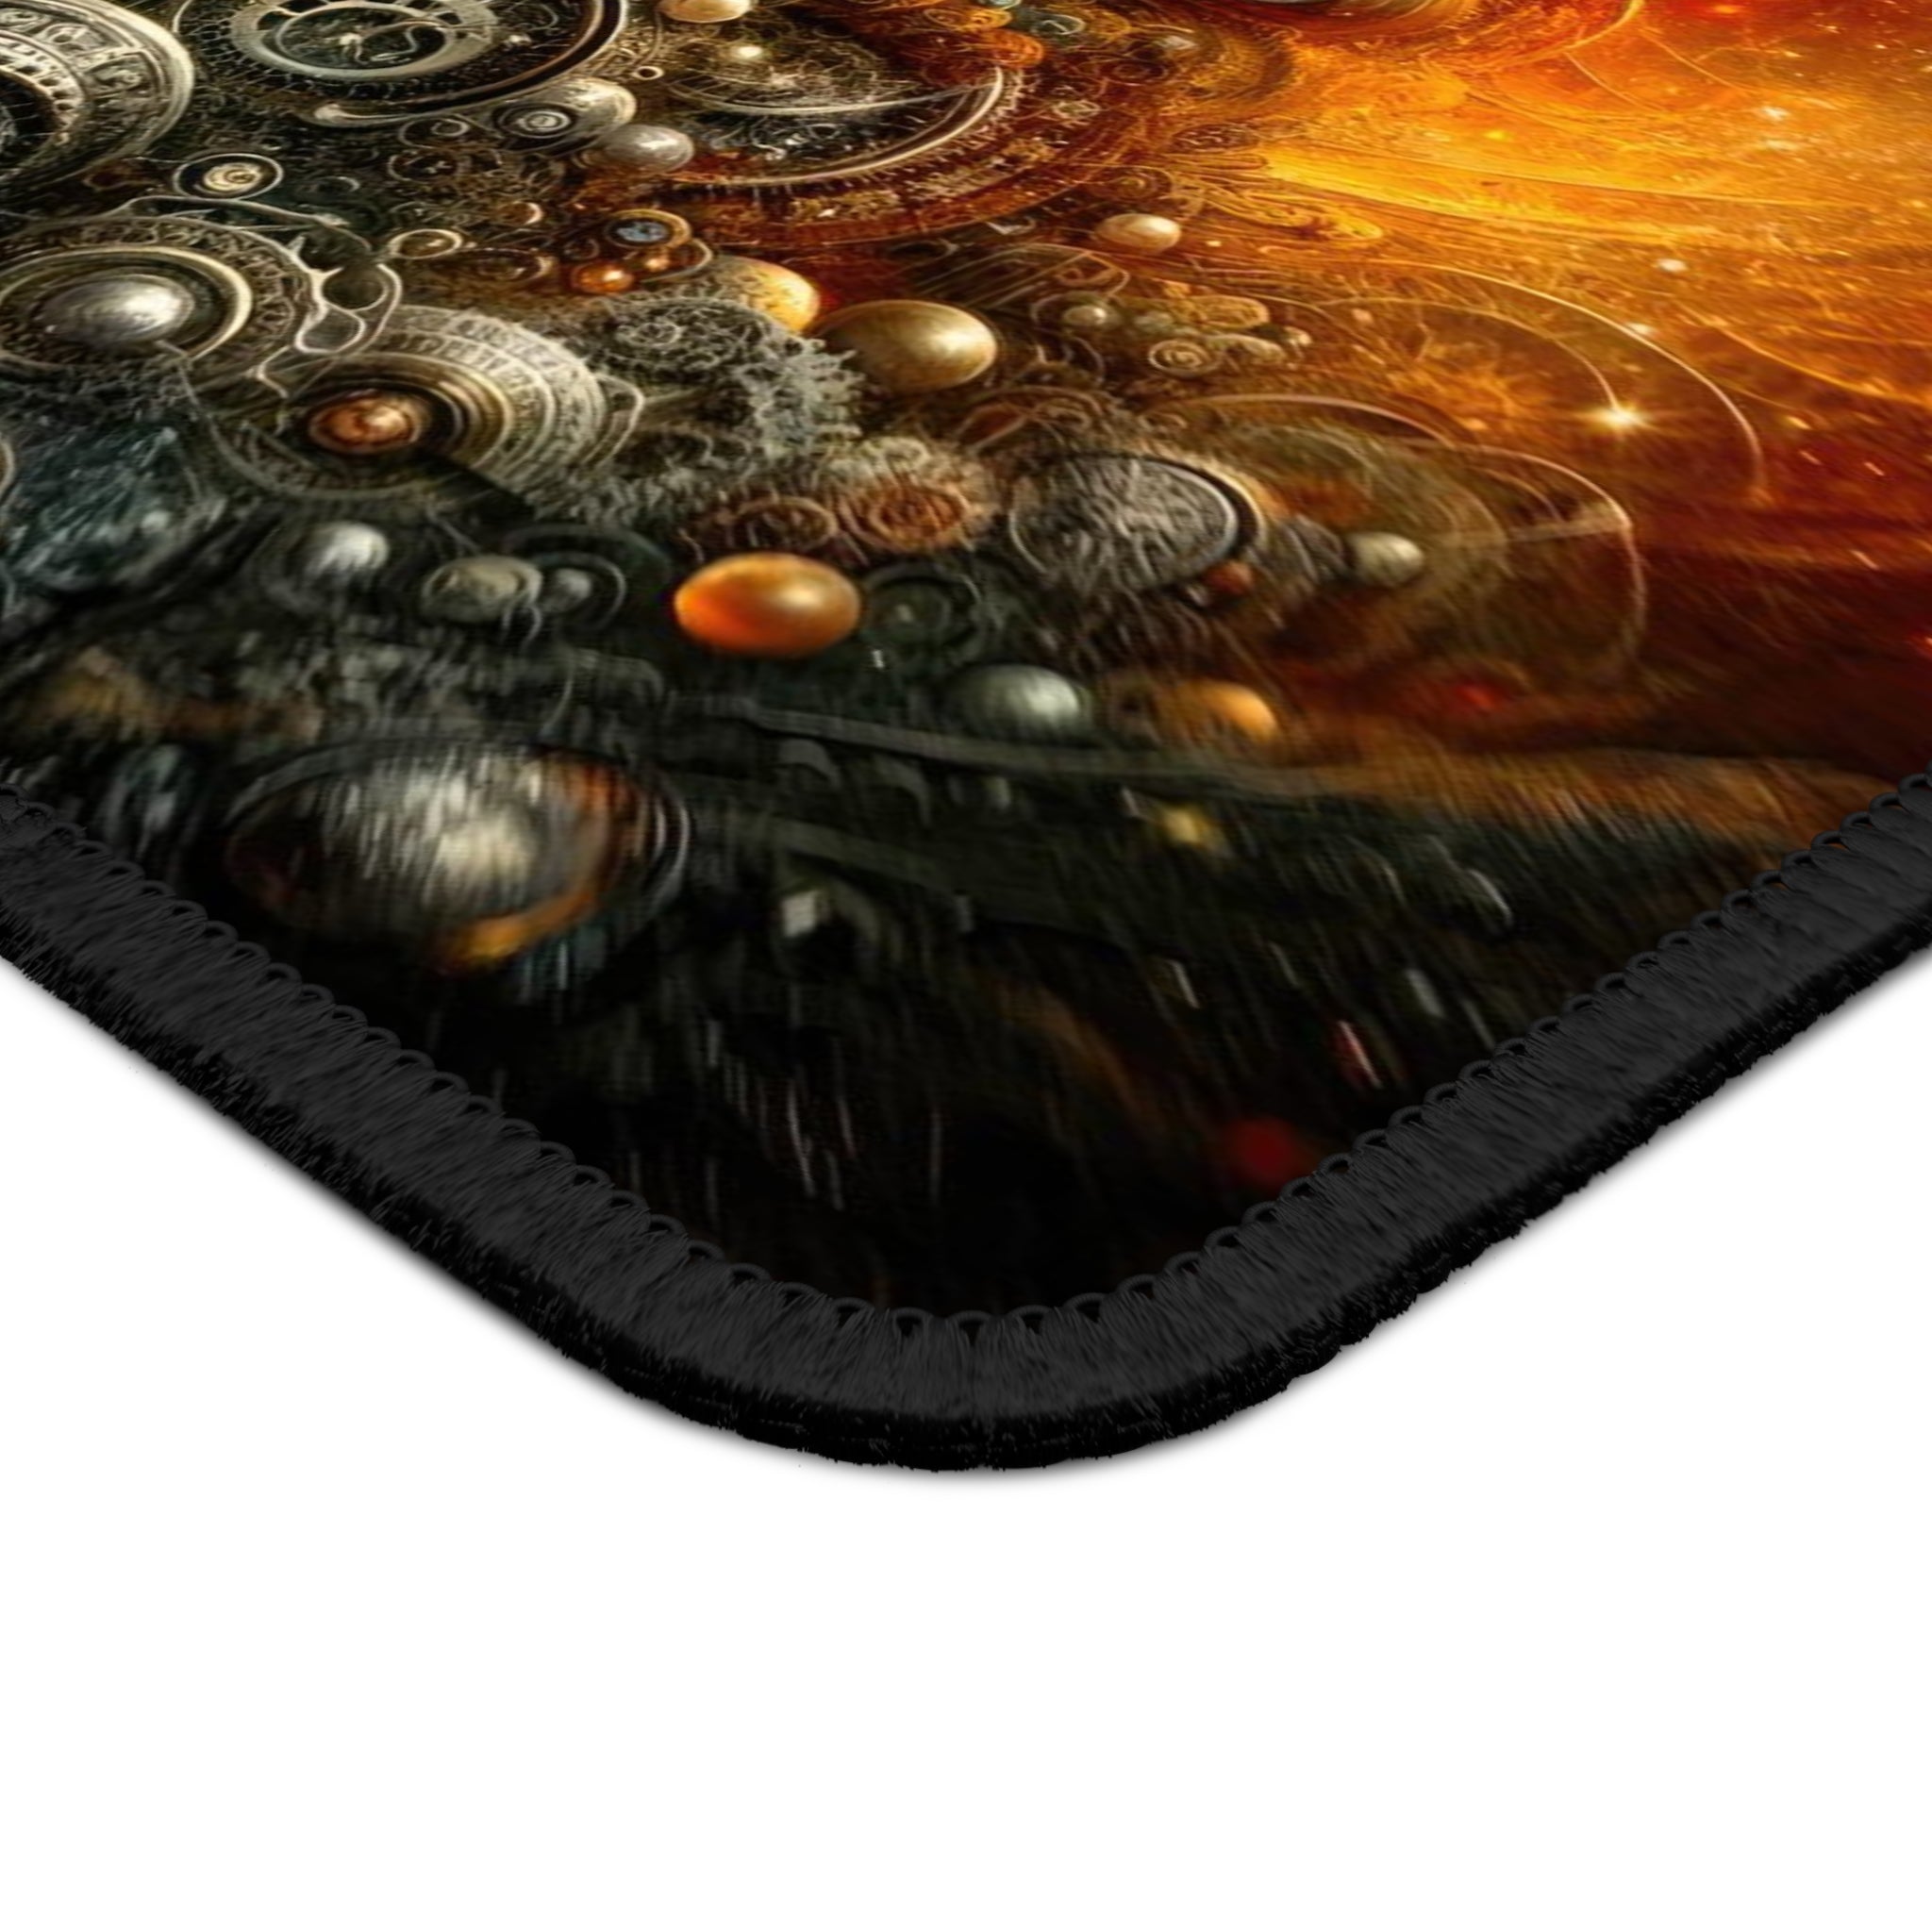 Aeonian Gears of the Ancient Gaming Mouse Pad